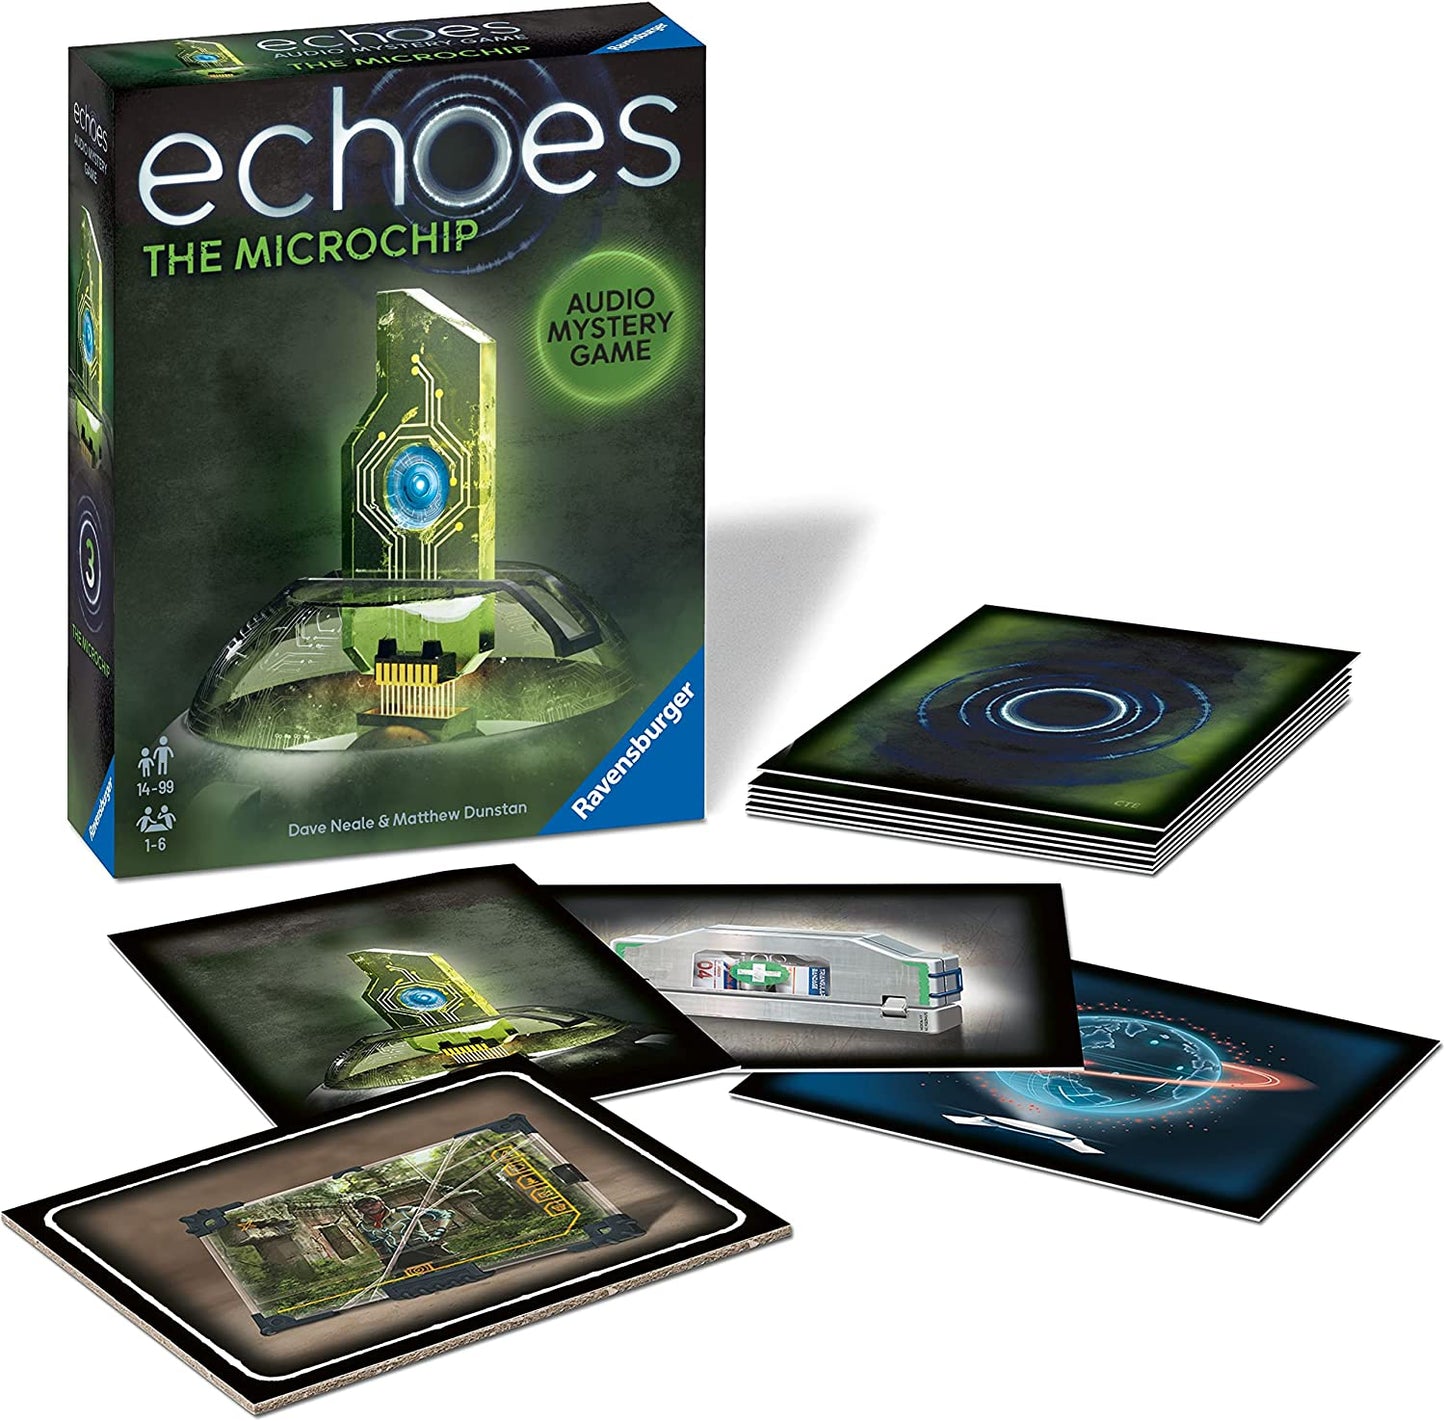 echoes Microchip